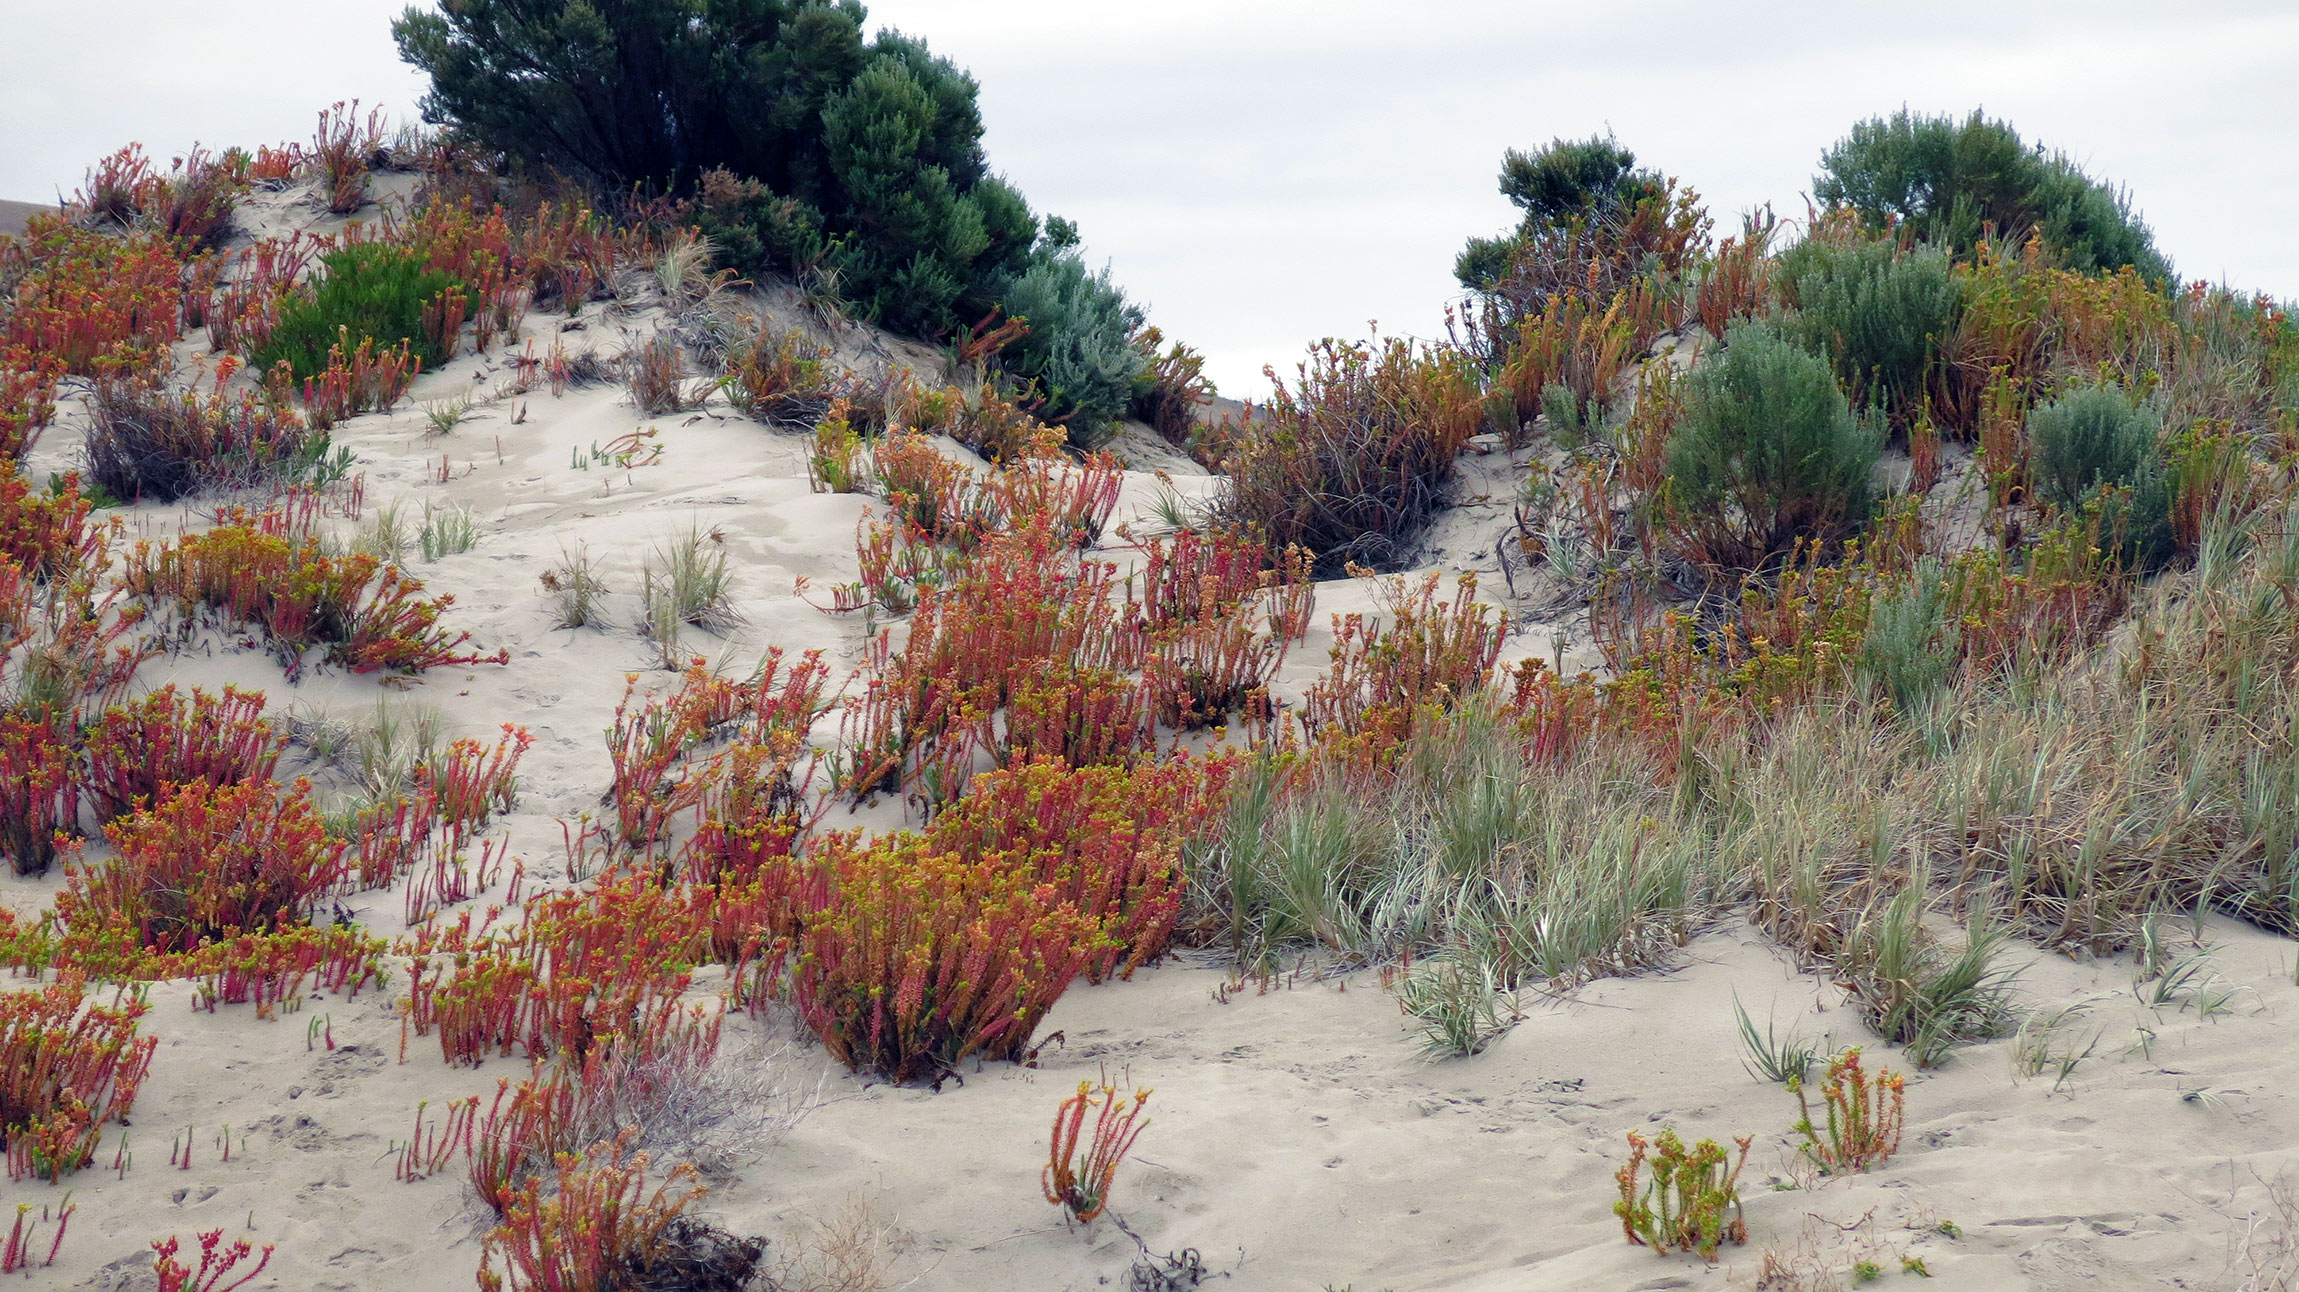 Colour in the dunes.